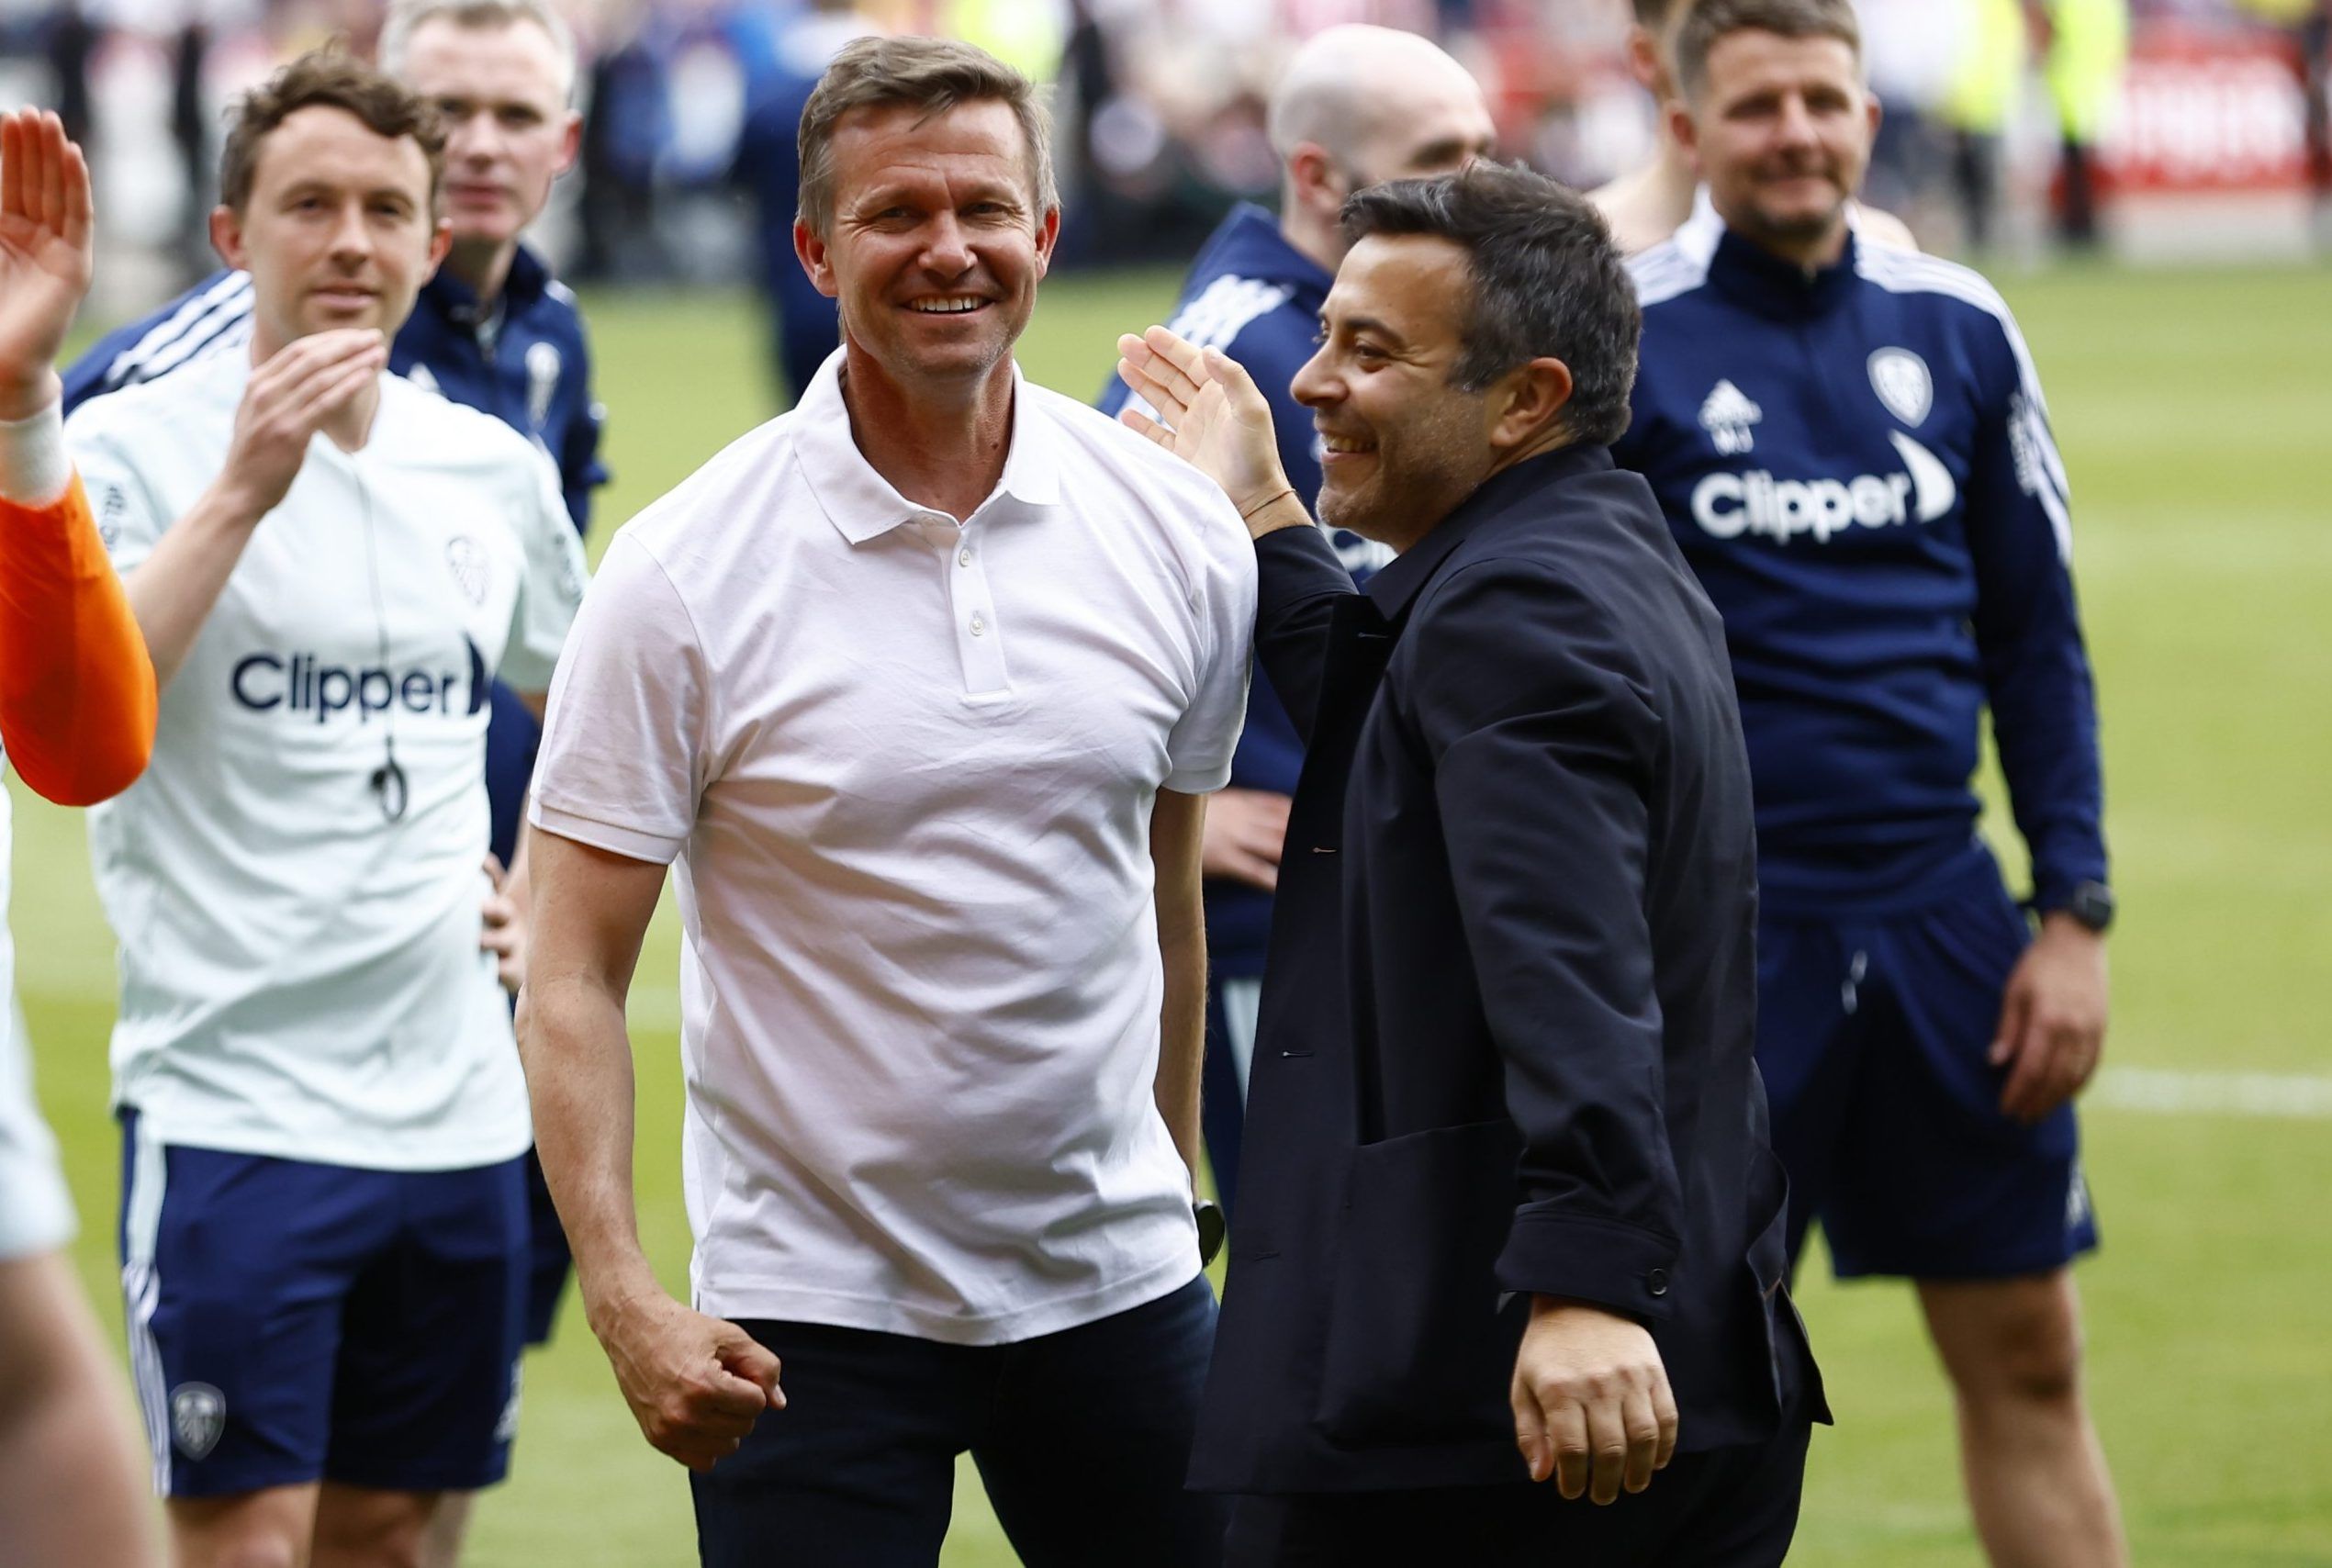 Leeds United manager Jesse Marsch and owner Andrea Radrizzani celebrate after the match as Leeds United avoid relegation from the Premier League